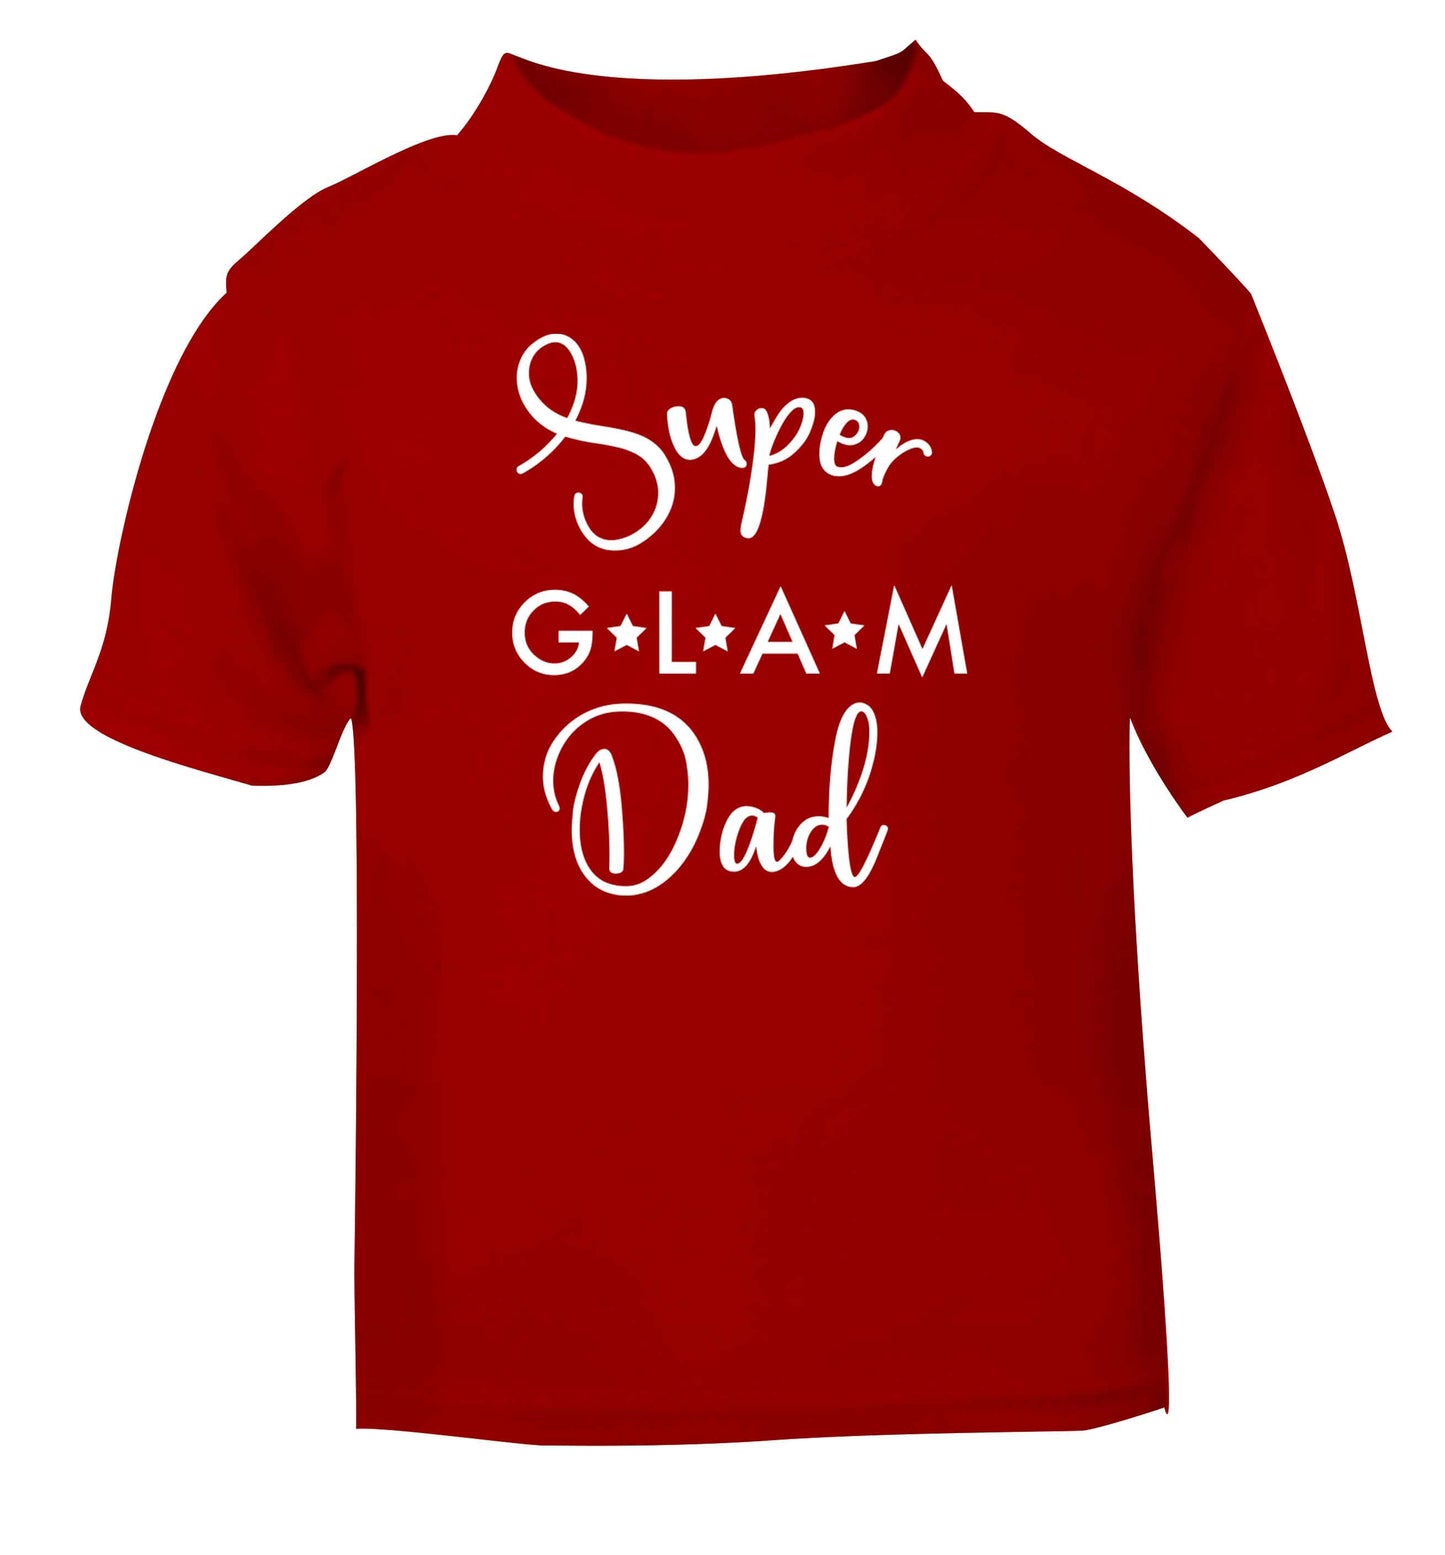 Super glam Dad red Baby Toddler Tshirt 2 Years